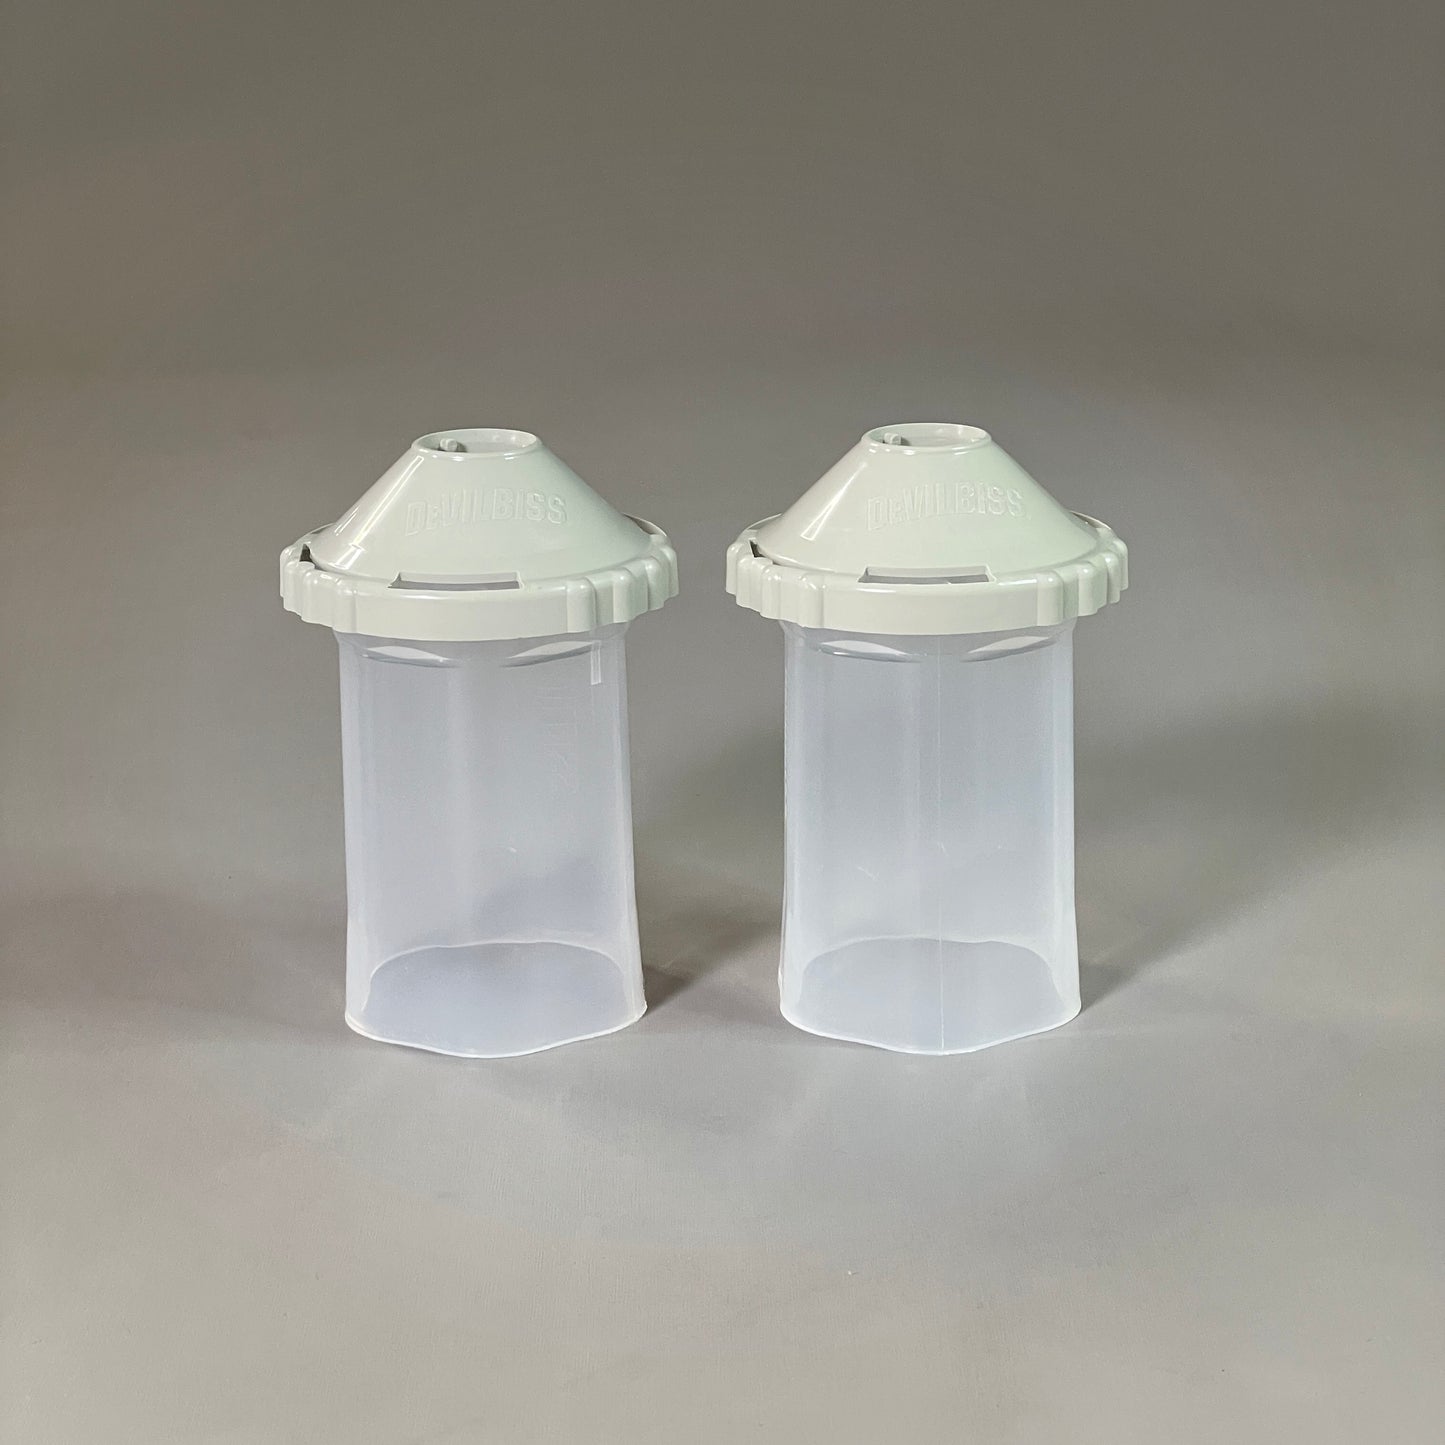 DEVILBISS Reusable Cup Frame and Lid 2-PACK 9oz DPC-607 802972 (New)